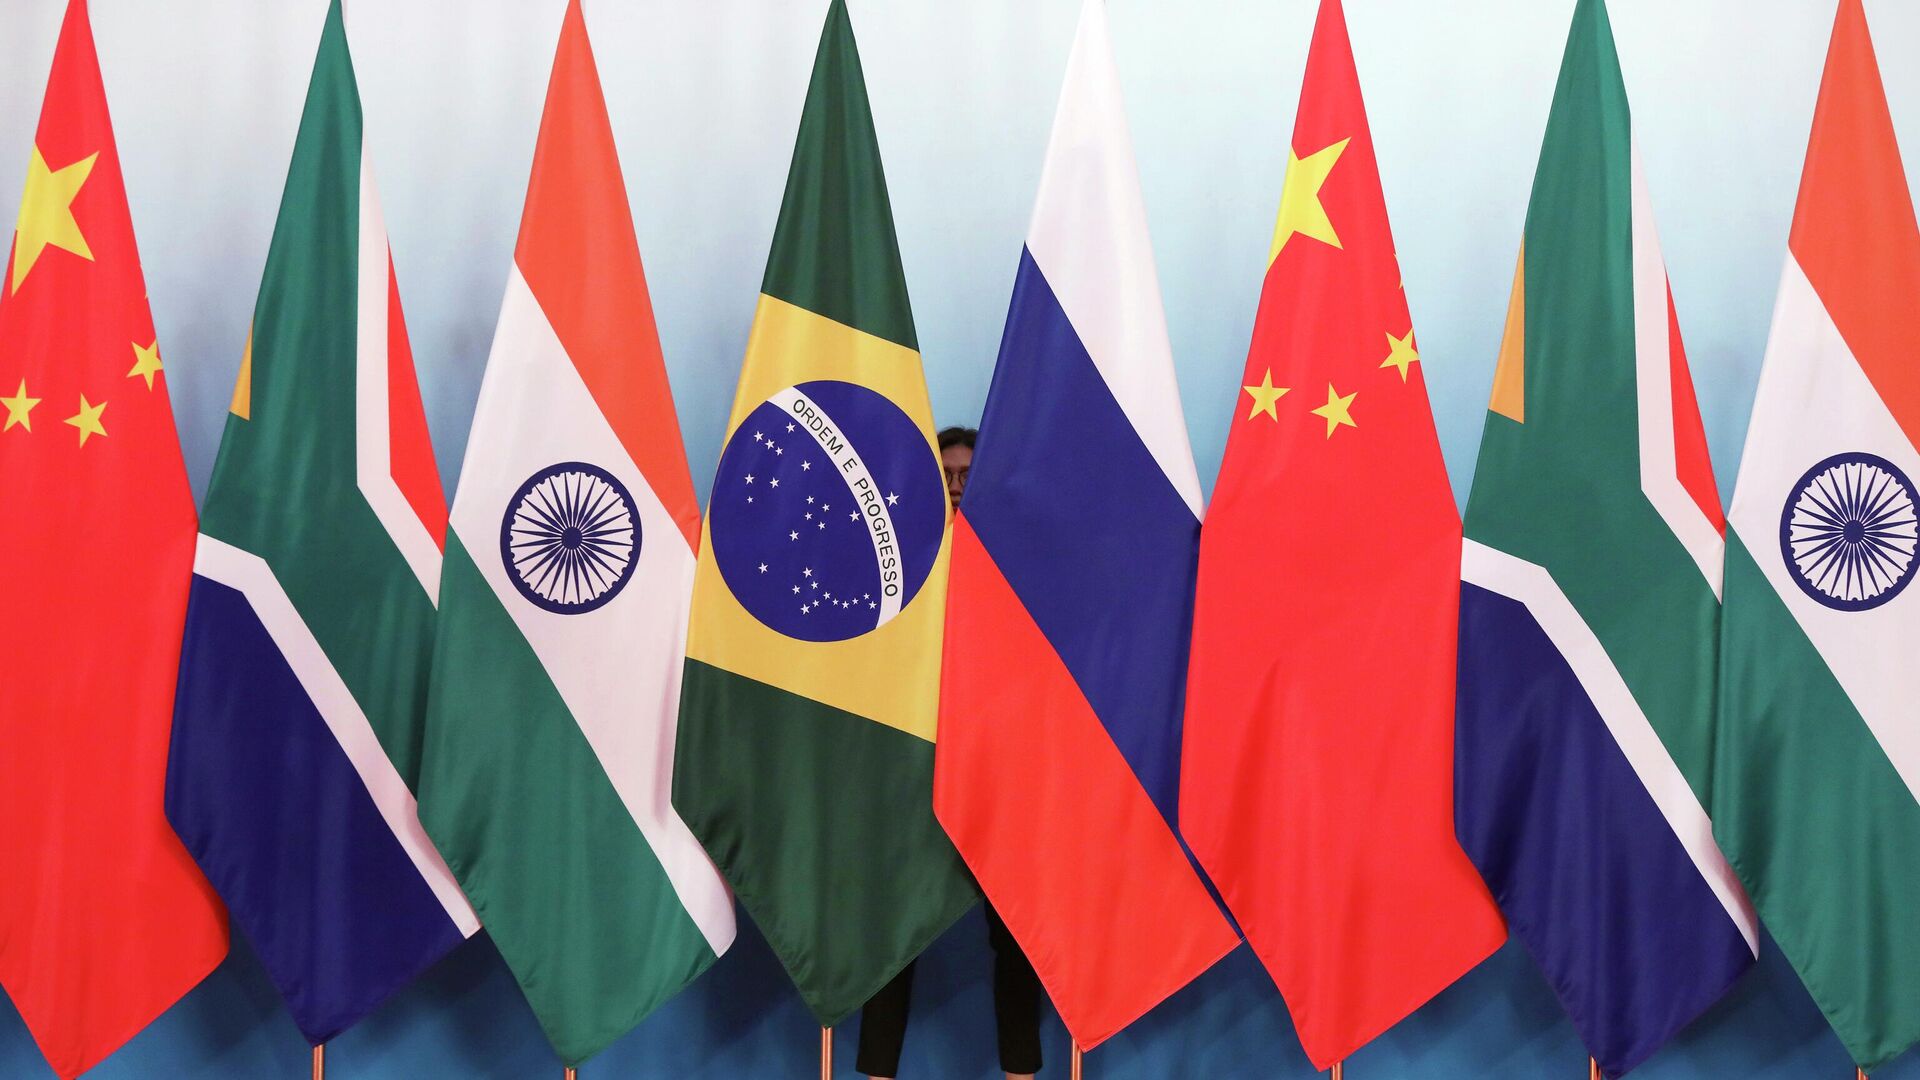 Staff worker stands behind national flags of Brazil, Russia, China, South Africa and India to tidy the flags ahead of a group photo during the BRICS Summit at the Xiamen International Conference and Exhibition Center in Xiamen, southeastern China's Fujian Province, Monday, Sept. 4, 2017. - Sputnik International, 1920, 24.05.2023